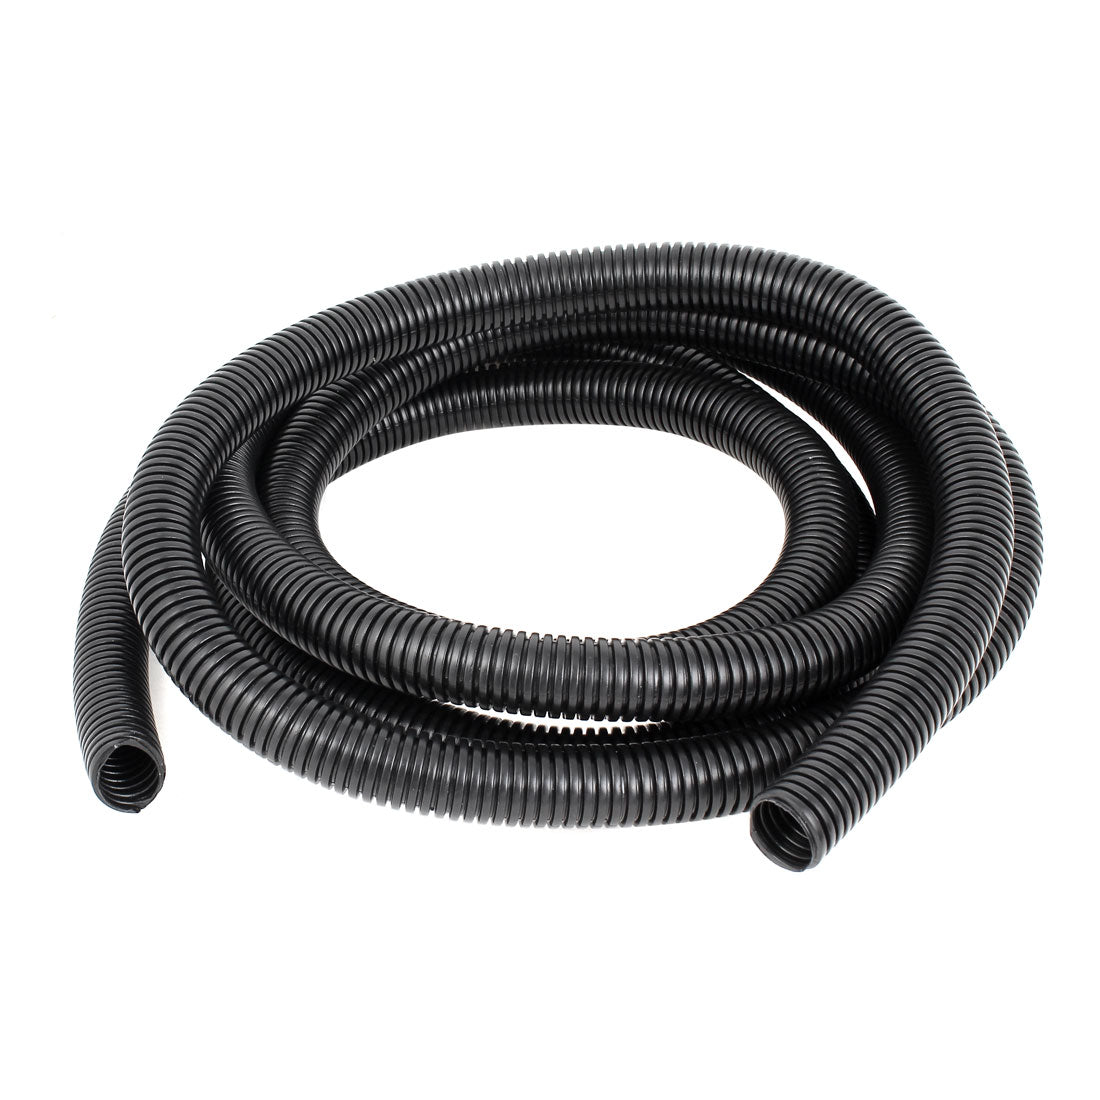 uxcell Uxcell 3.7 M 20 x 25 mm Plastic Corrugated Conduit Tube for Garden,Office Black